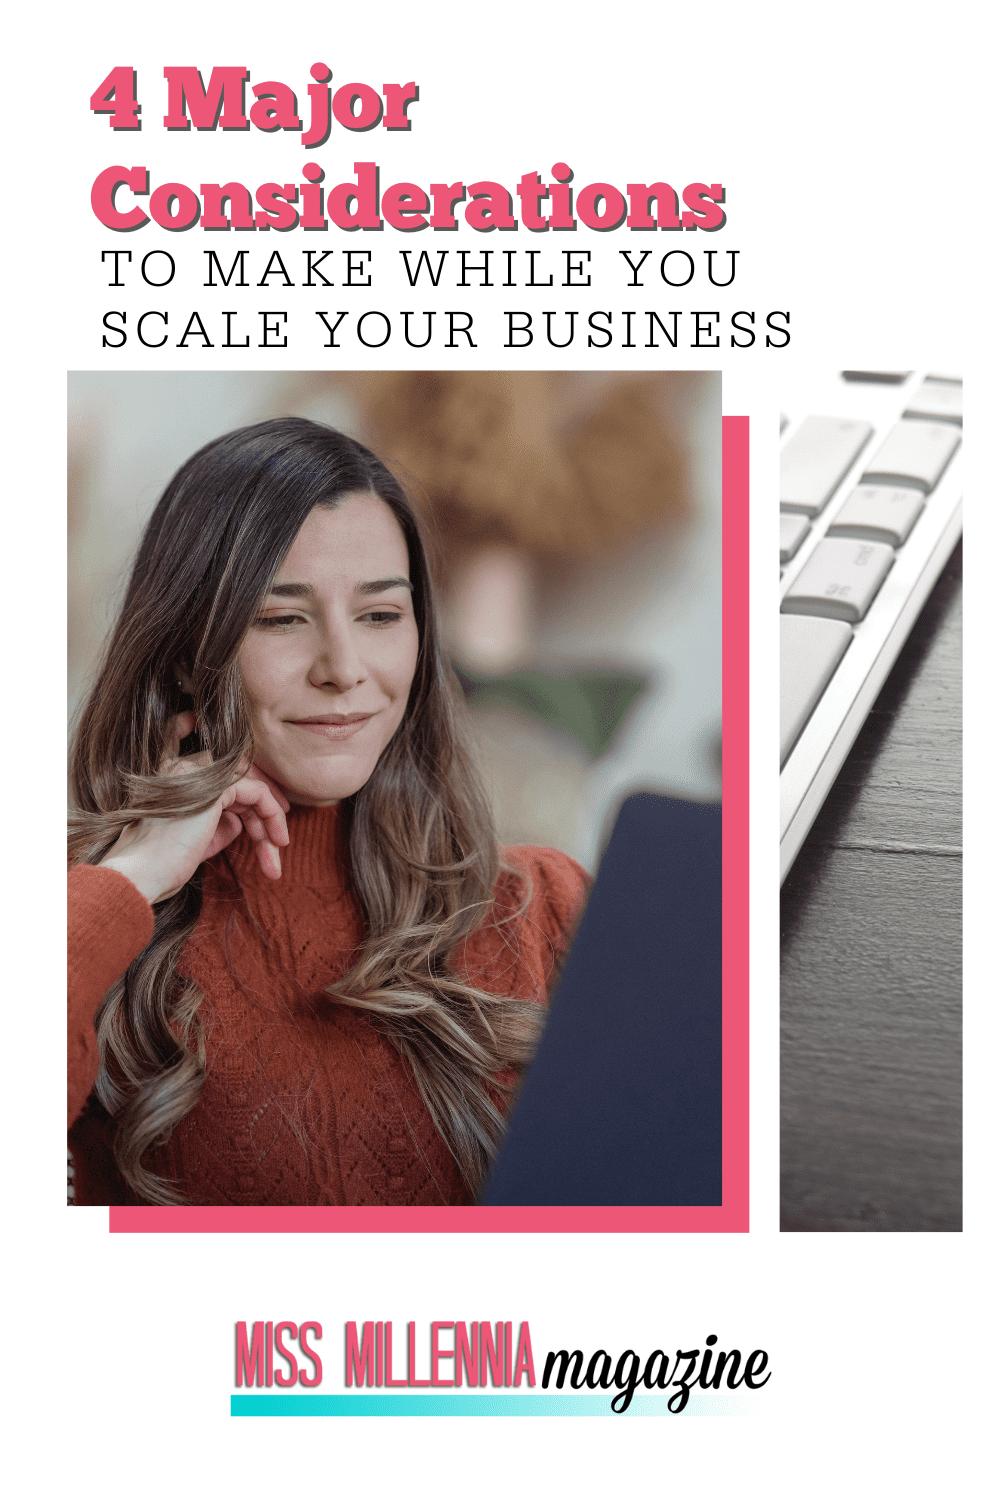 4 Major Considerations to Make While You Scale Your Business